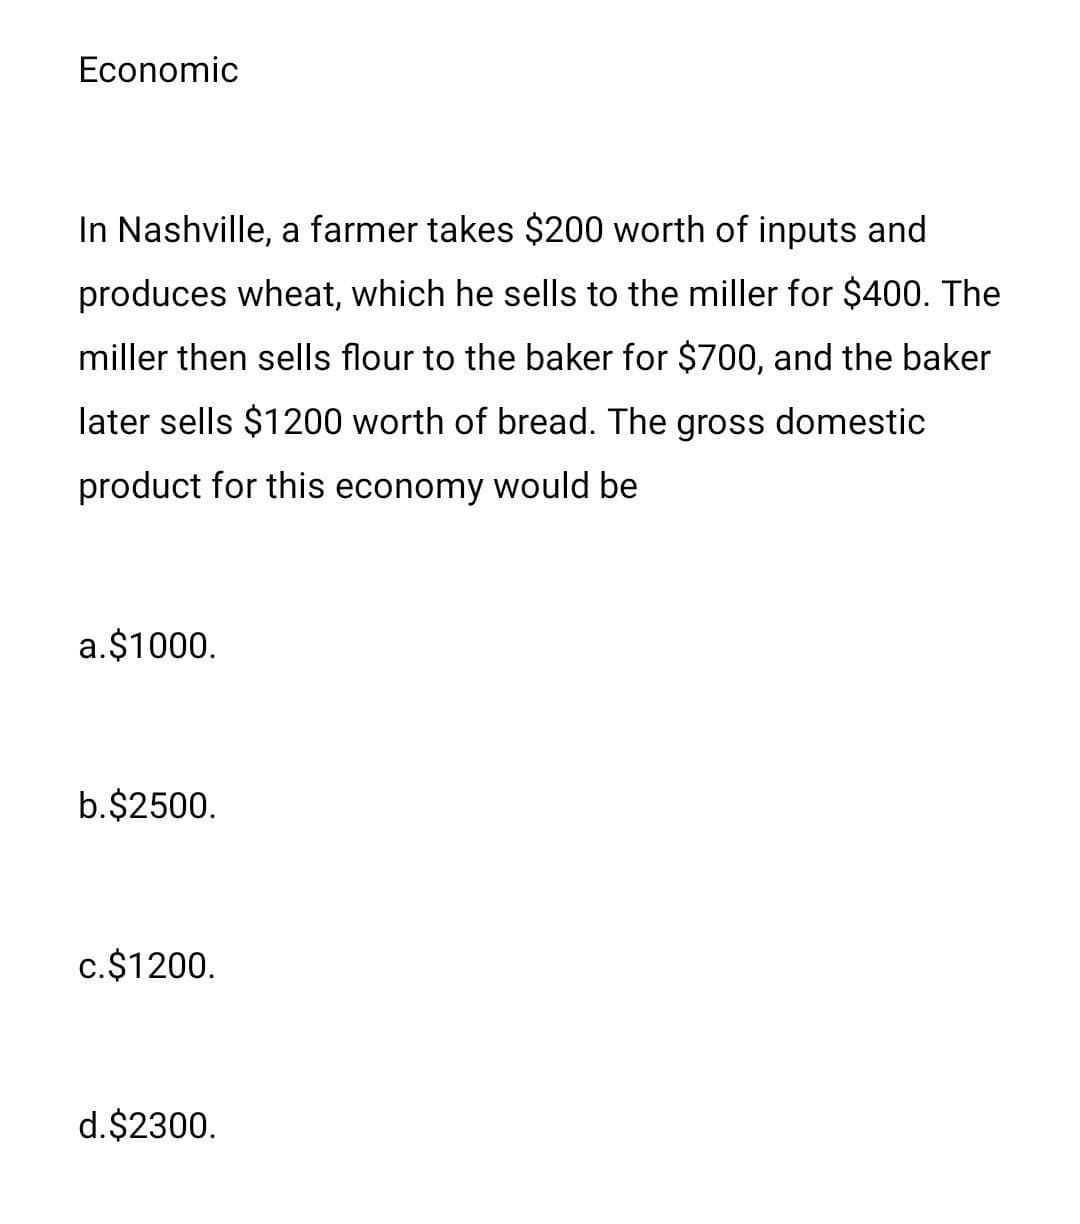 Economic
In Nashville, a farmer takes $200 worth of inputs and
produces wheat, which he sells to the miller for $400. The
miller then sells flour to the baker for $700, and the baker
later sells $1200 worth of bread. The gross domestic
product for this economy would be
a.$1000.
b.$2500.
c.$1200.
d.$2300.
